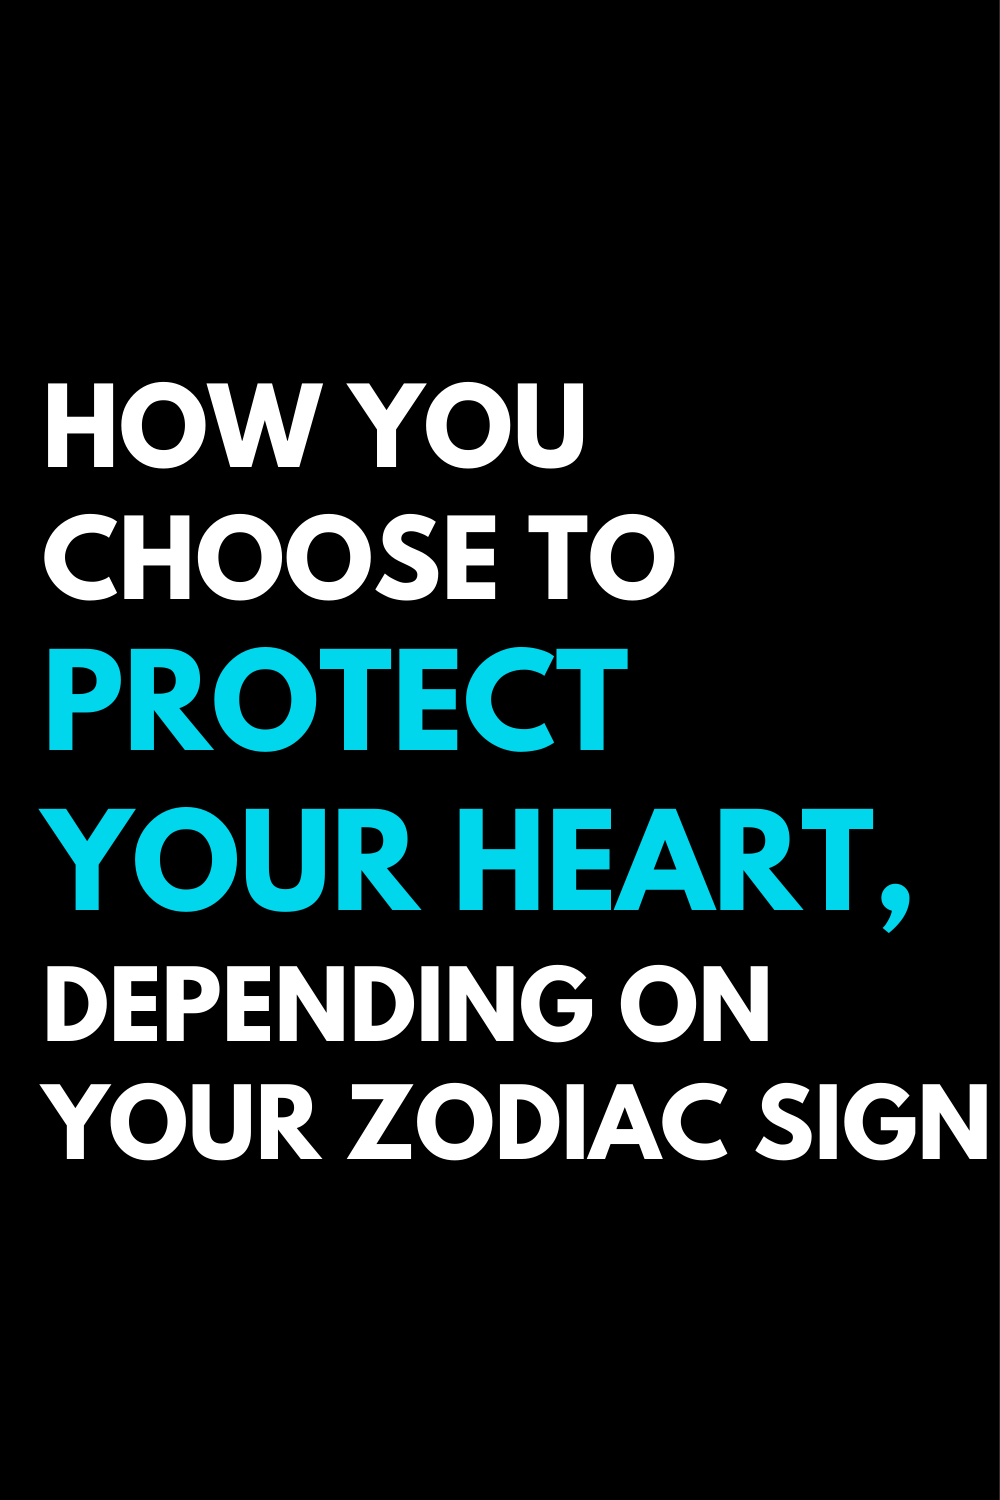 How you choose to protect your heart, depending on your zodiac sign